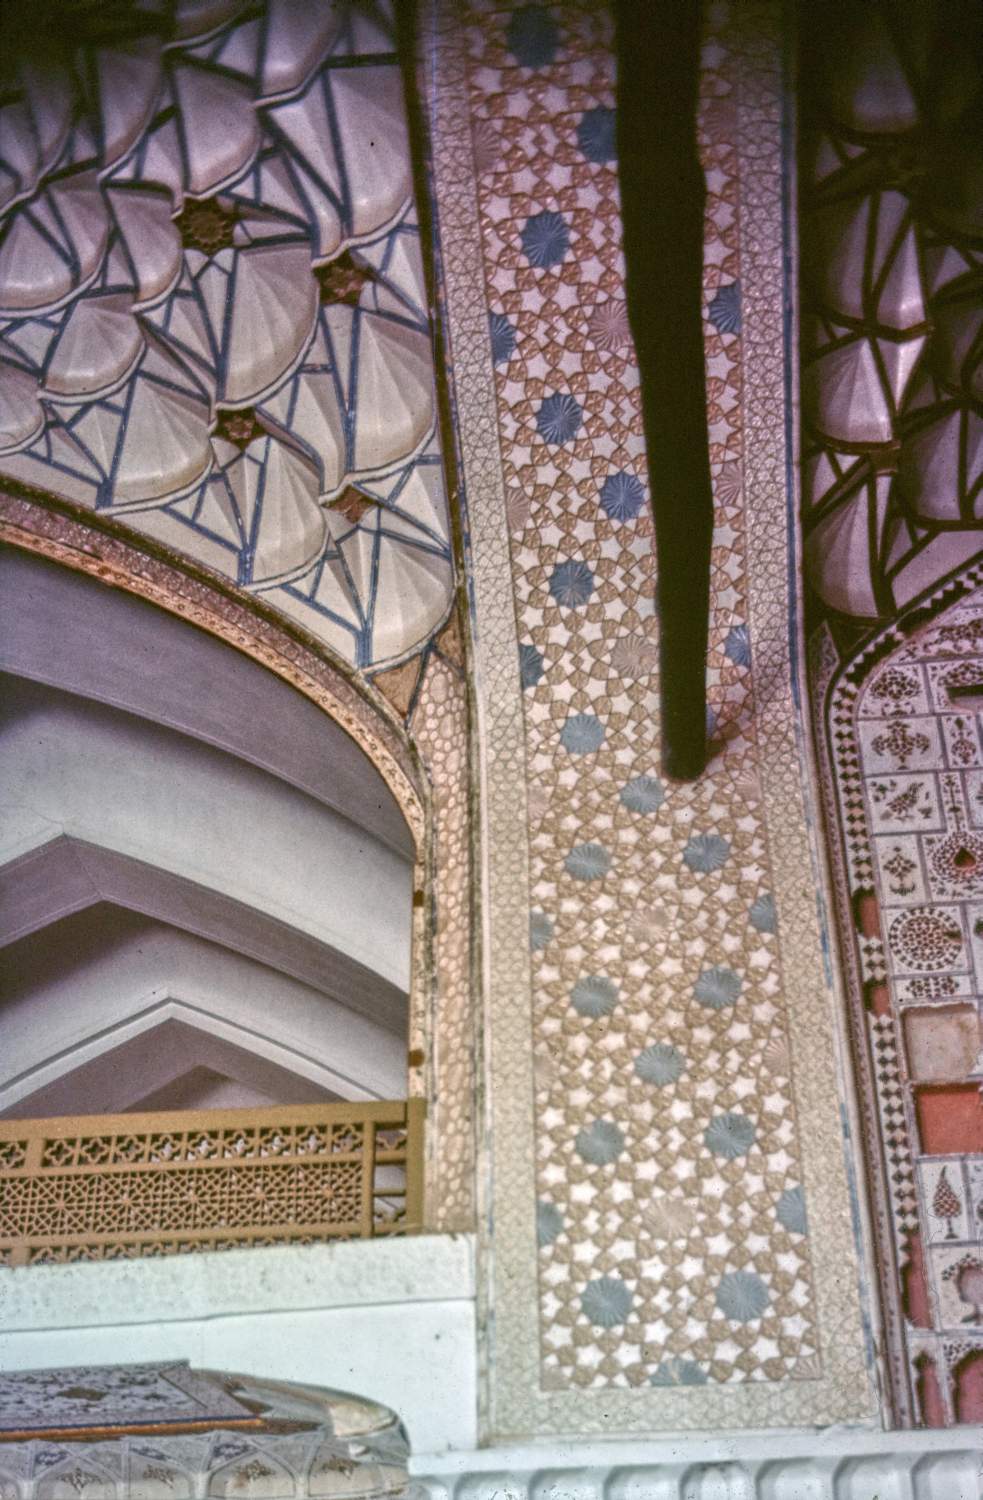 Private house in the Julfa neighborhood of Isfahan, interior view, detail of architectural ornament